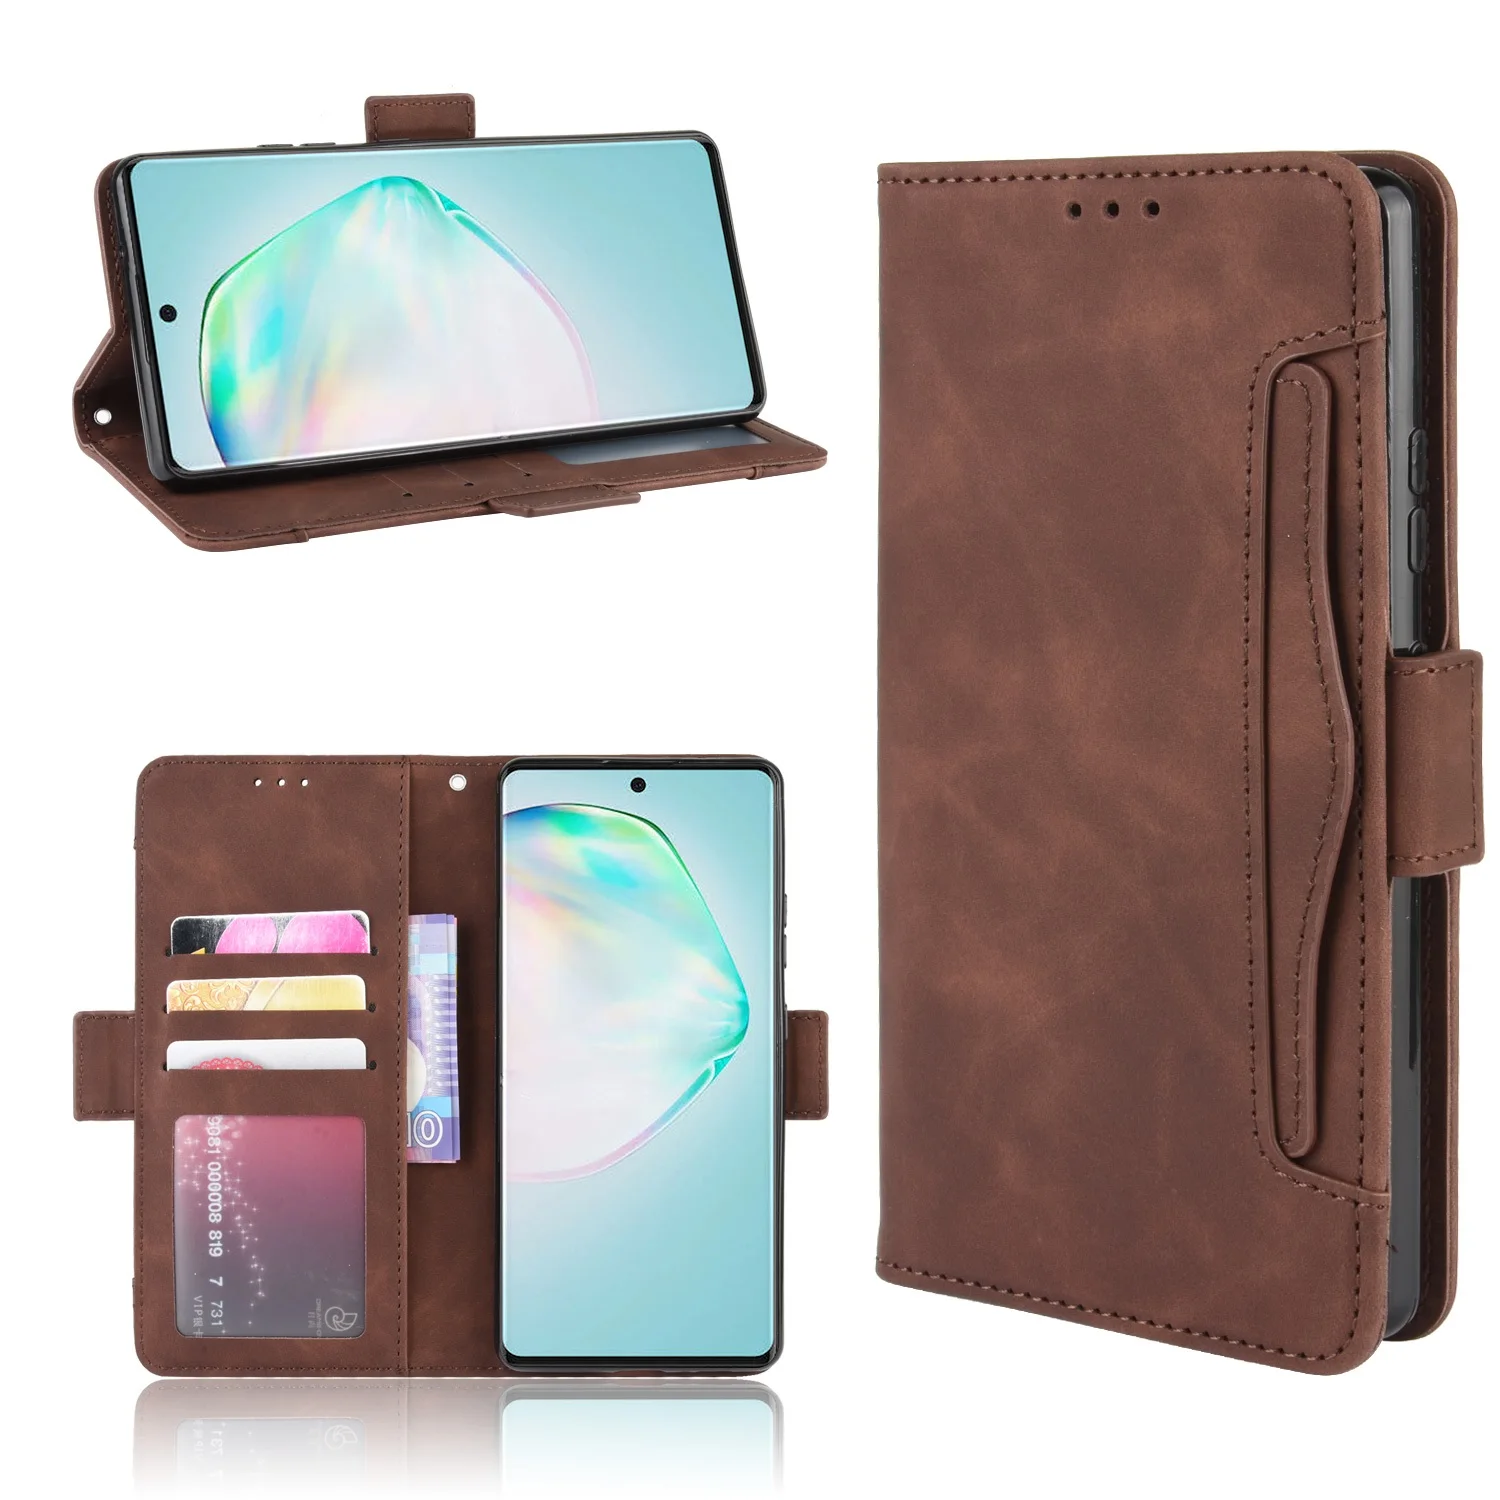 

Case for A80 A81 A82 5G A90 5G A91 M60S M80S Flip Case Removable Card Slot PU Leather Cover for Quantum 2 Note 10 Lite S10 Lite